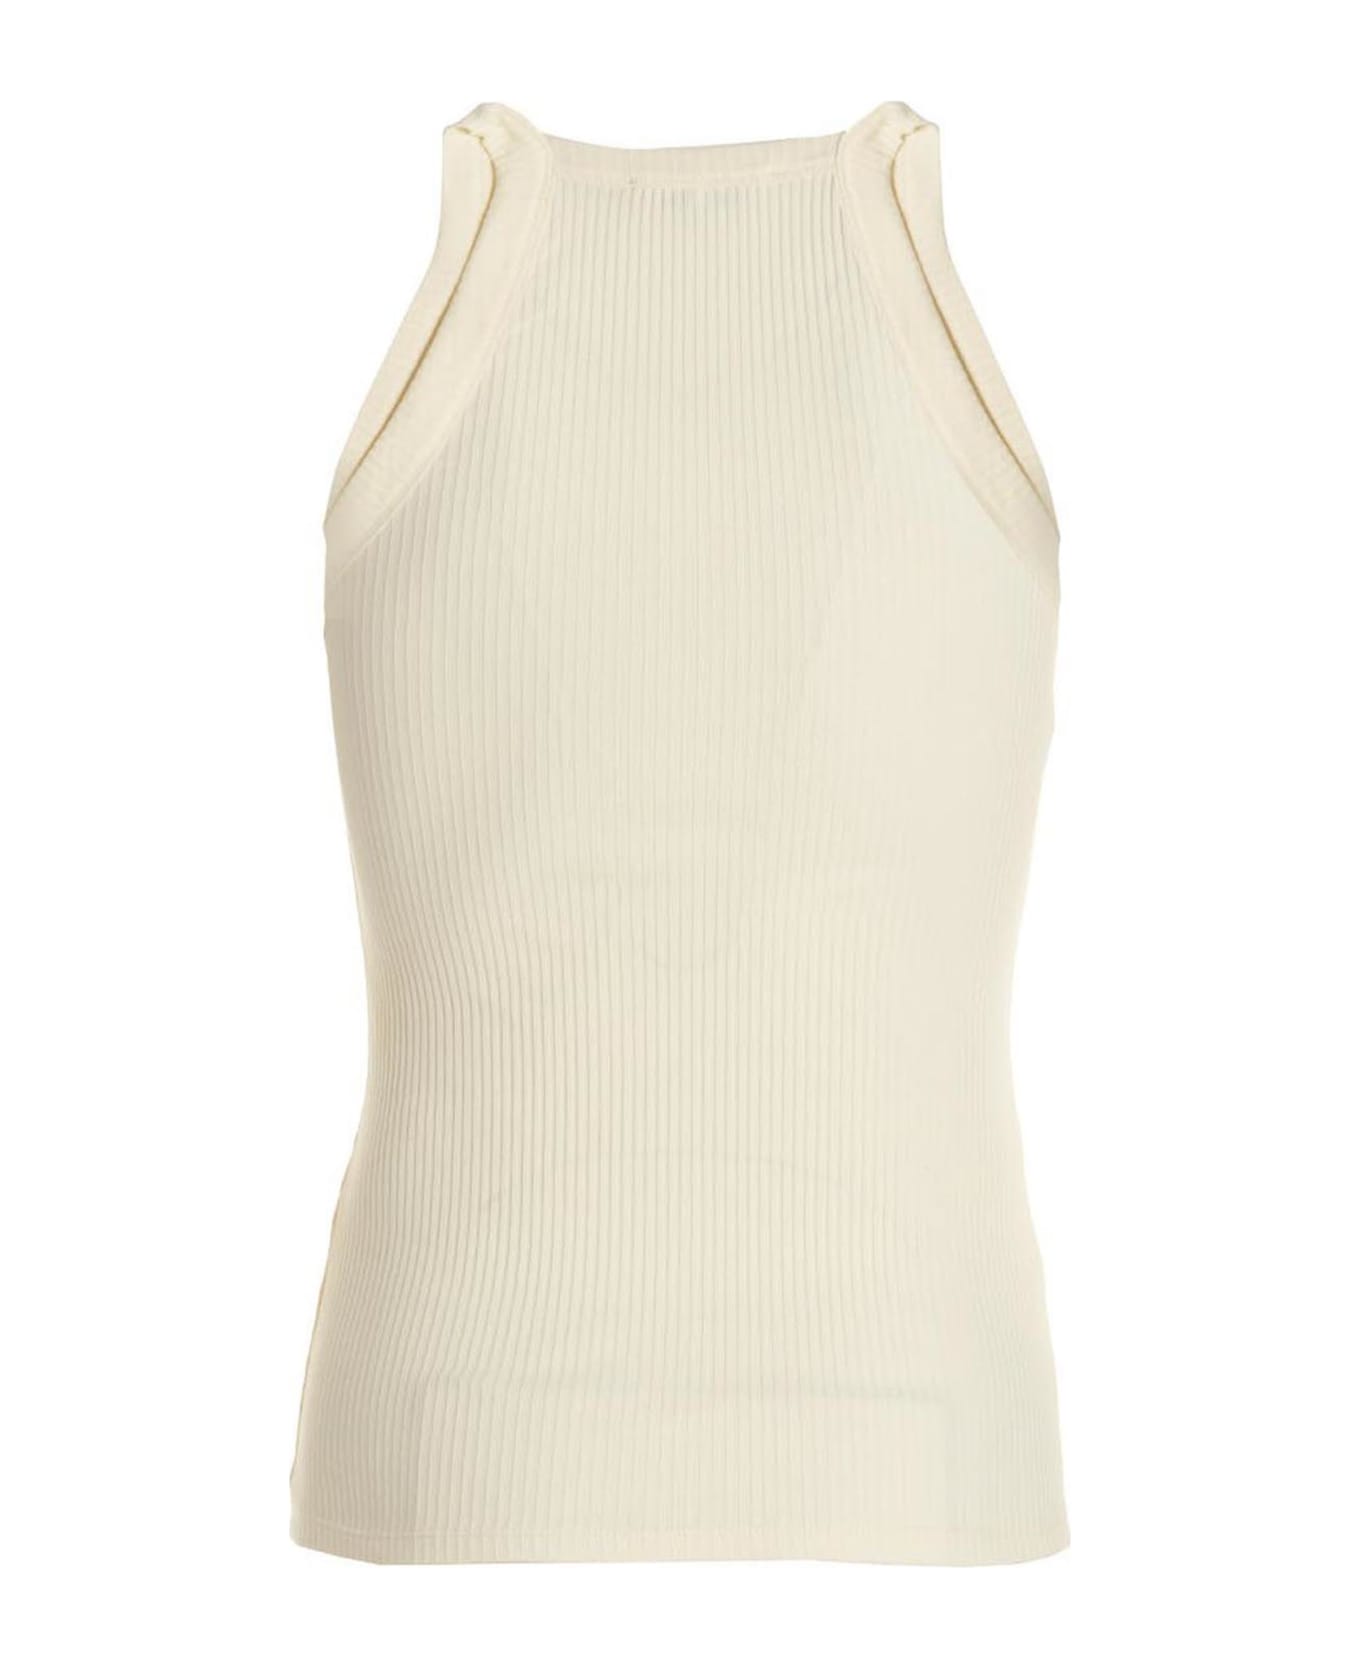 Wales Bonner Groove Tank Top - 100 IVORY